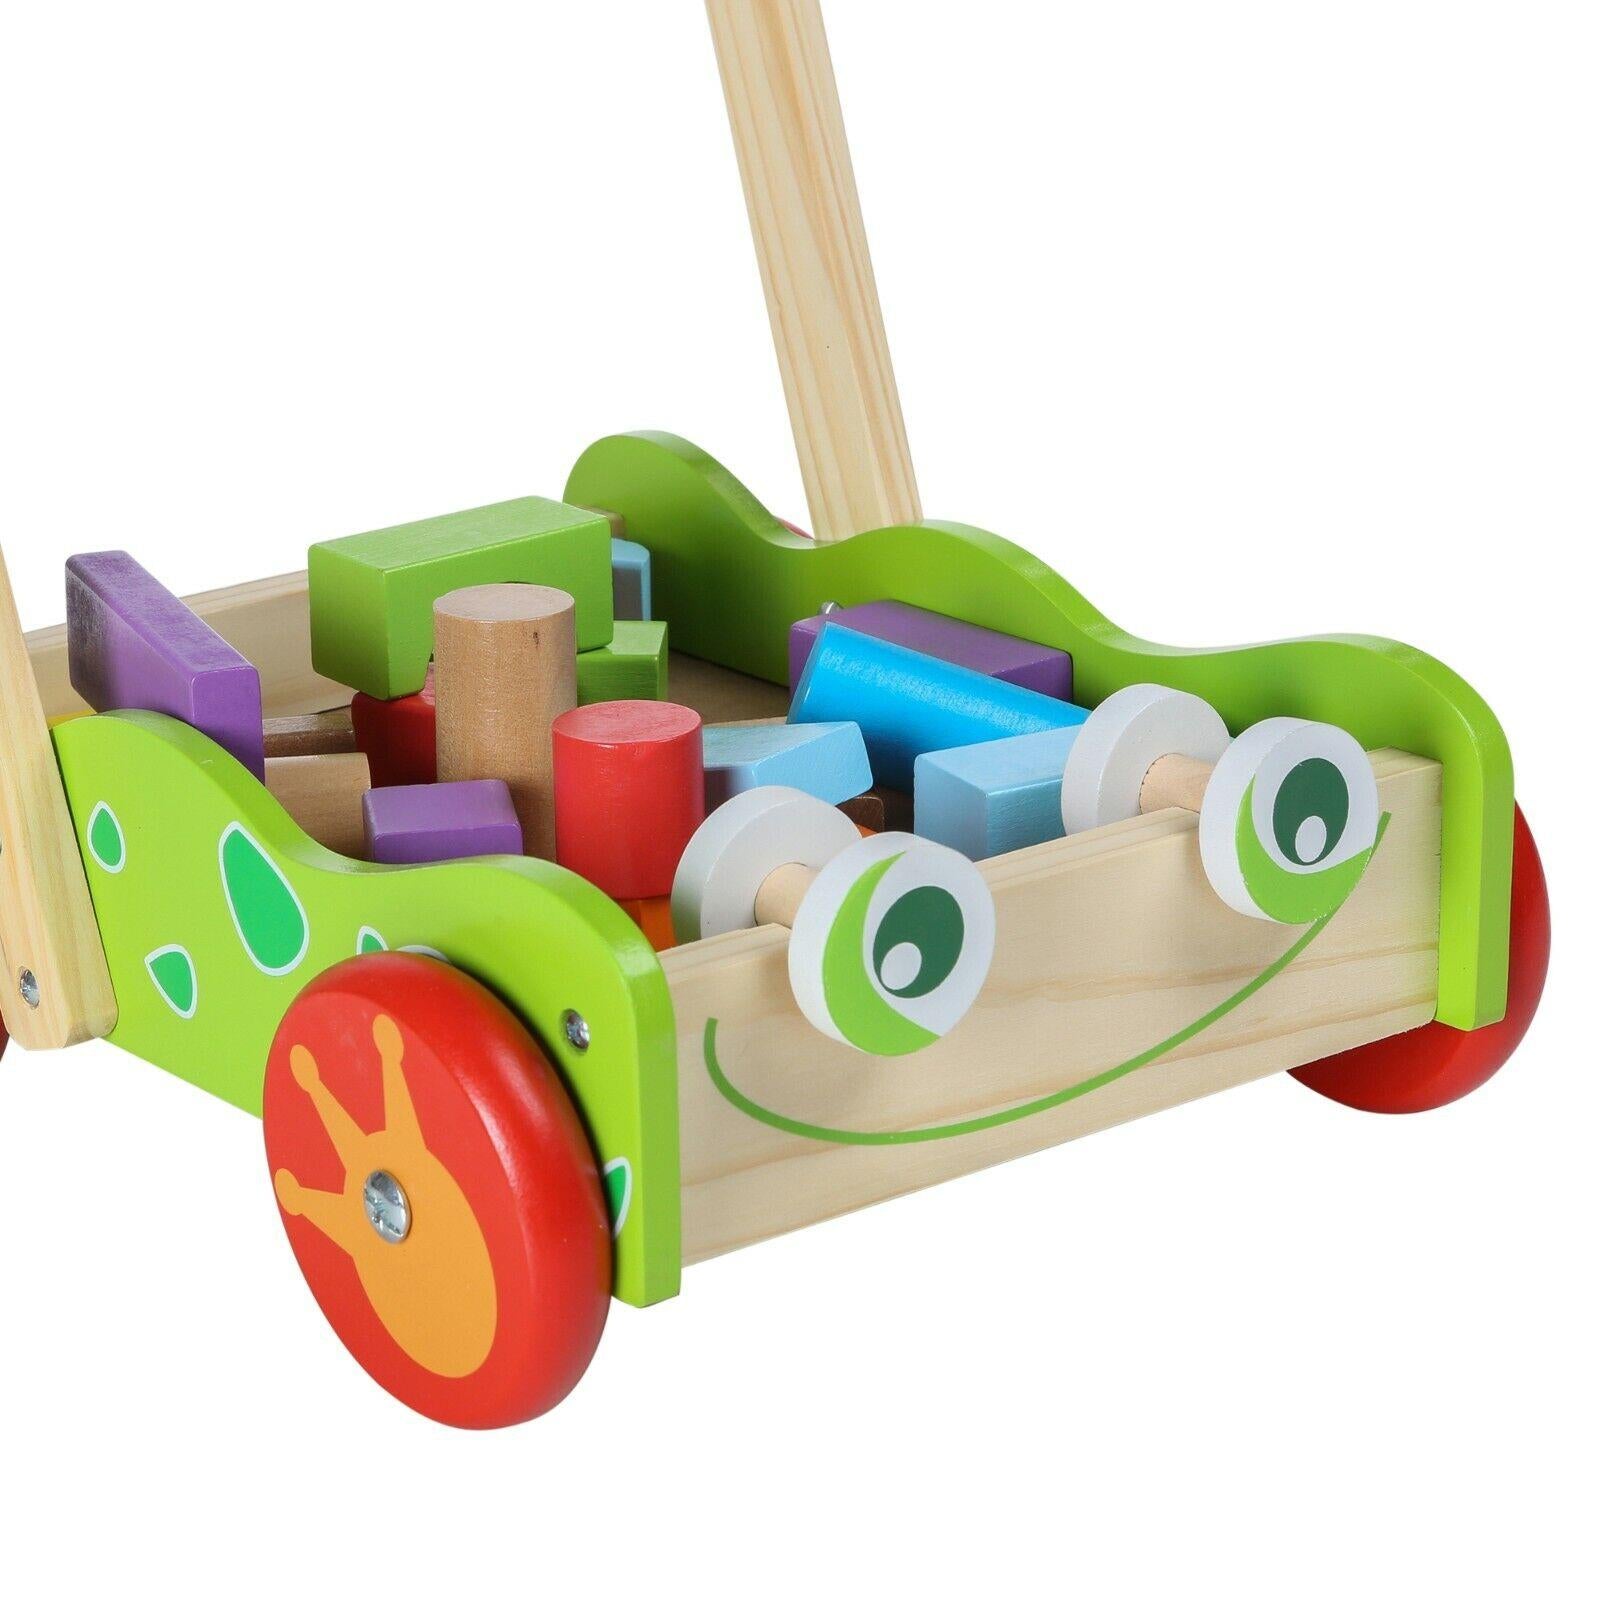 Baby Wooden Walker and Building Bricks Set by The Magic Toy Shop - The Magic Toy Shop